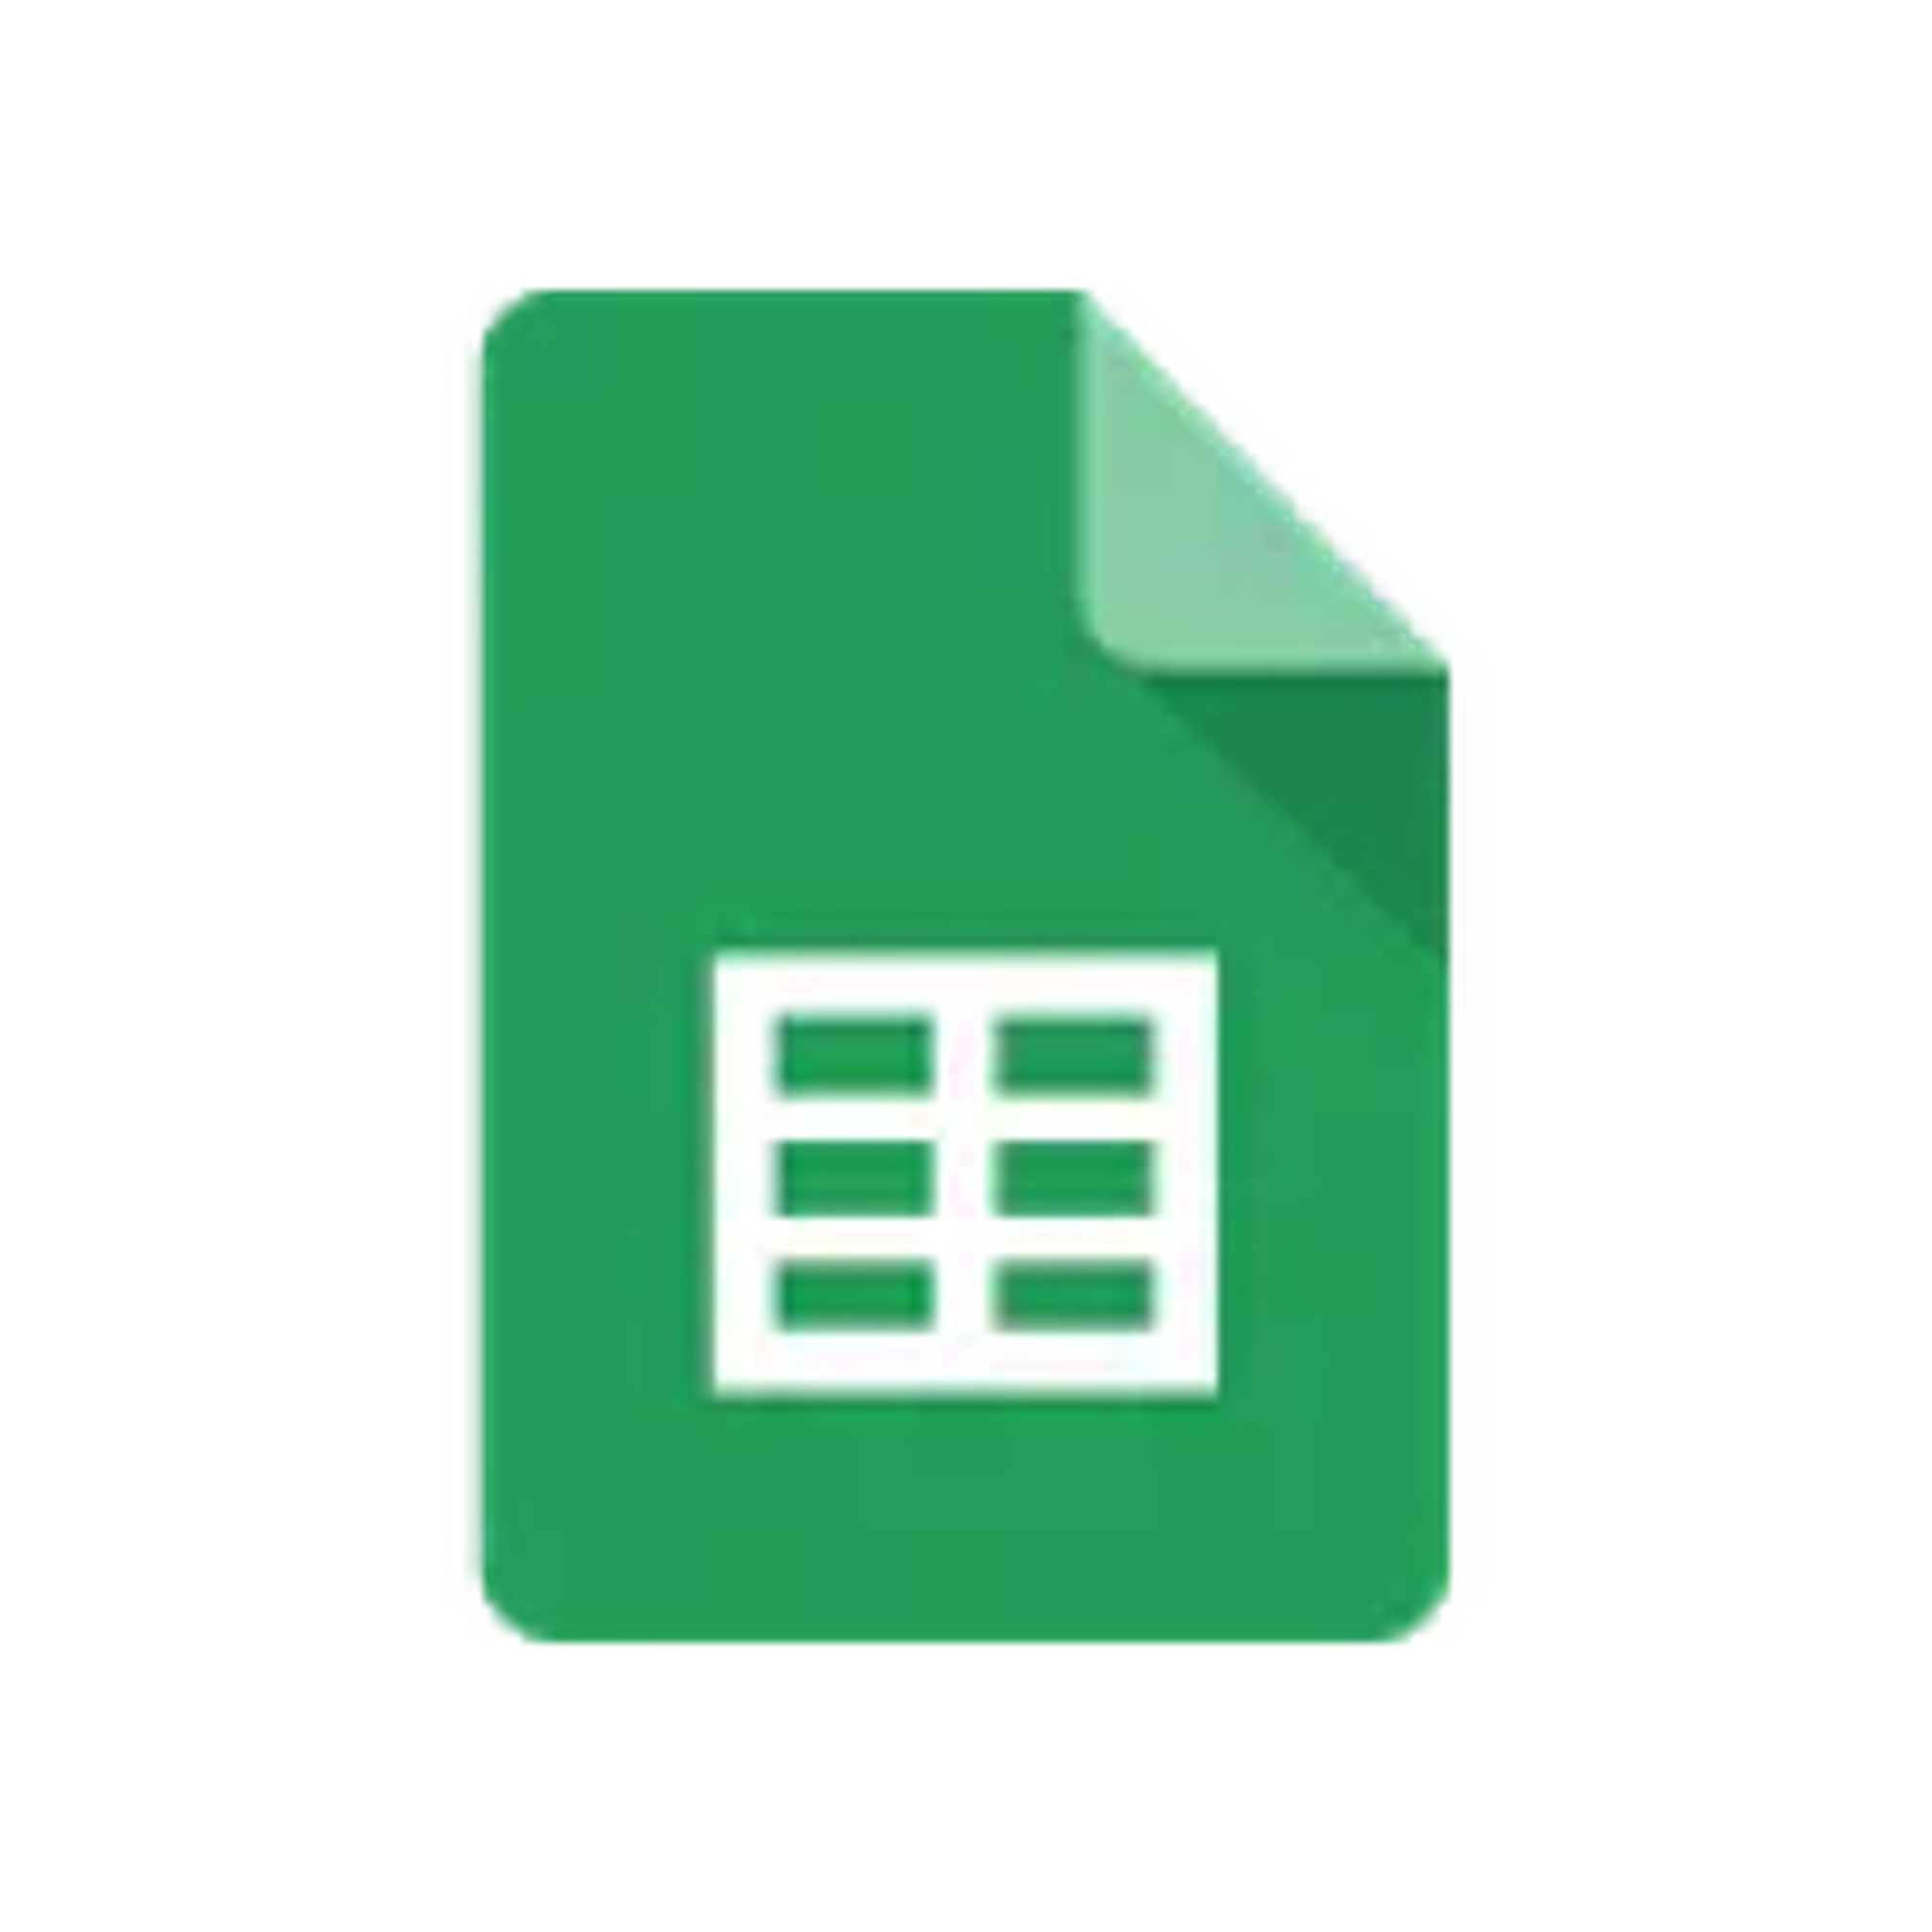 Google Sheets
Export Tally form submissions to Google Sheets.